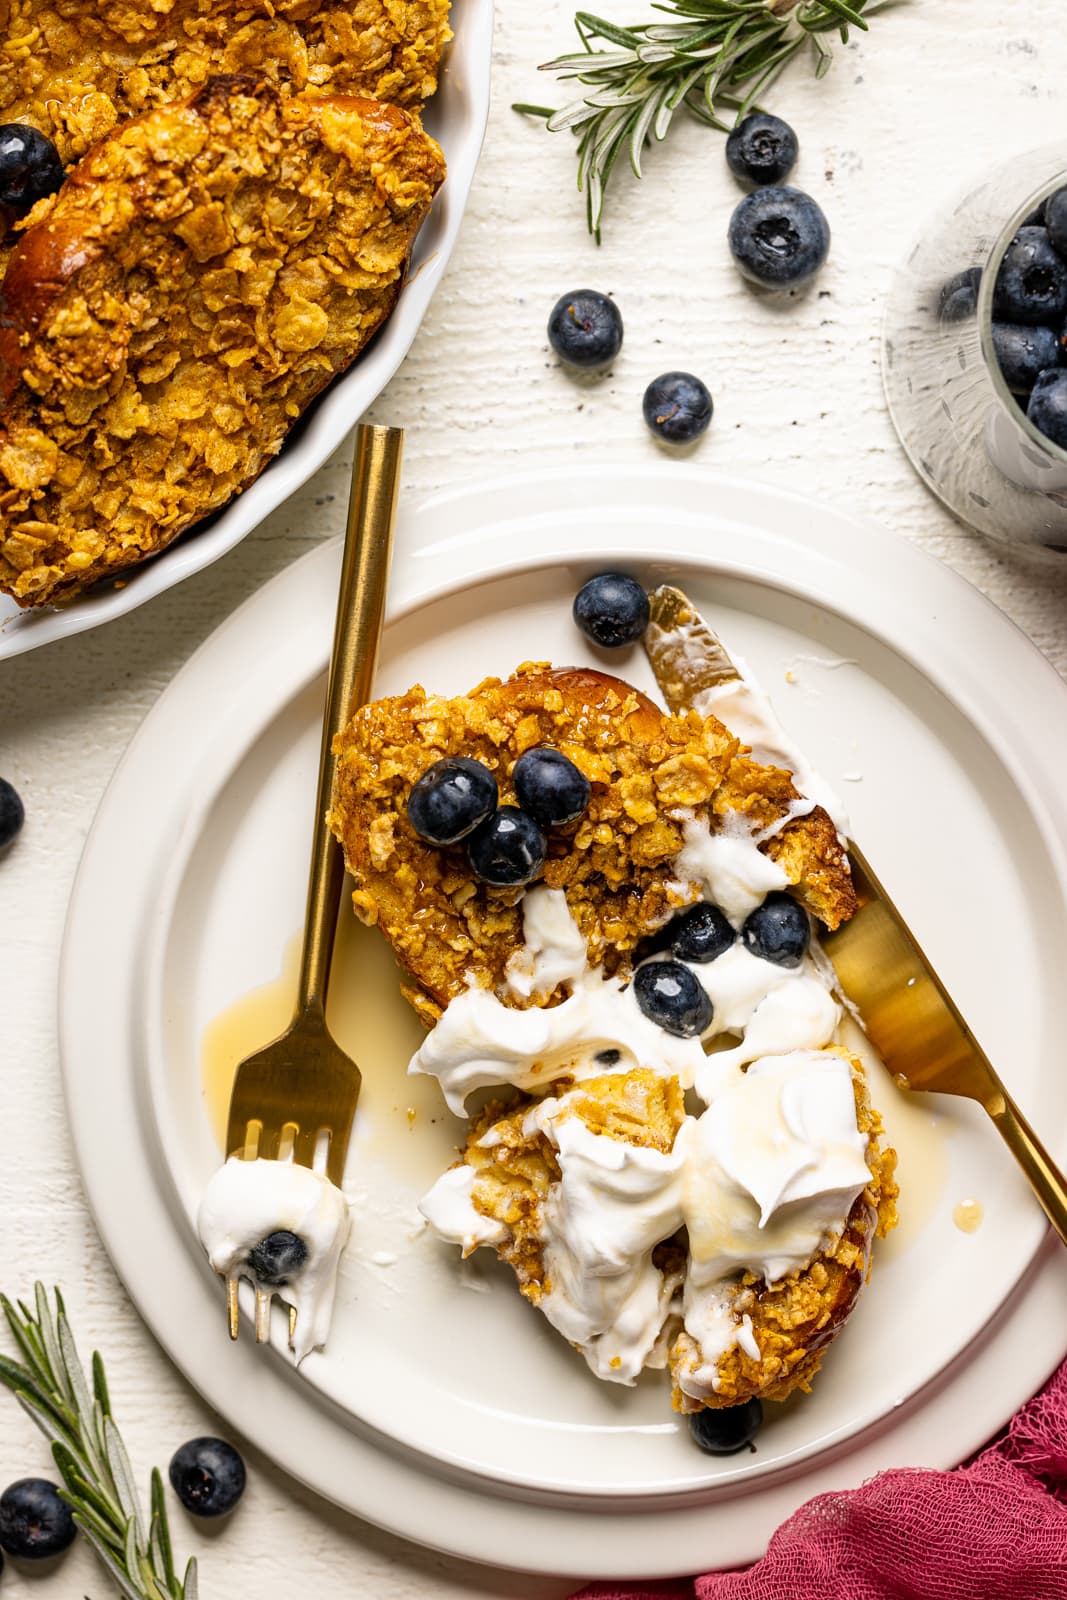 Slice of french toast on a white plate with blueberries, whipped cream, fork + knife, on a white table.